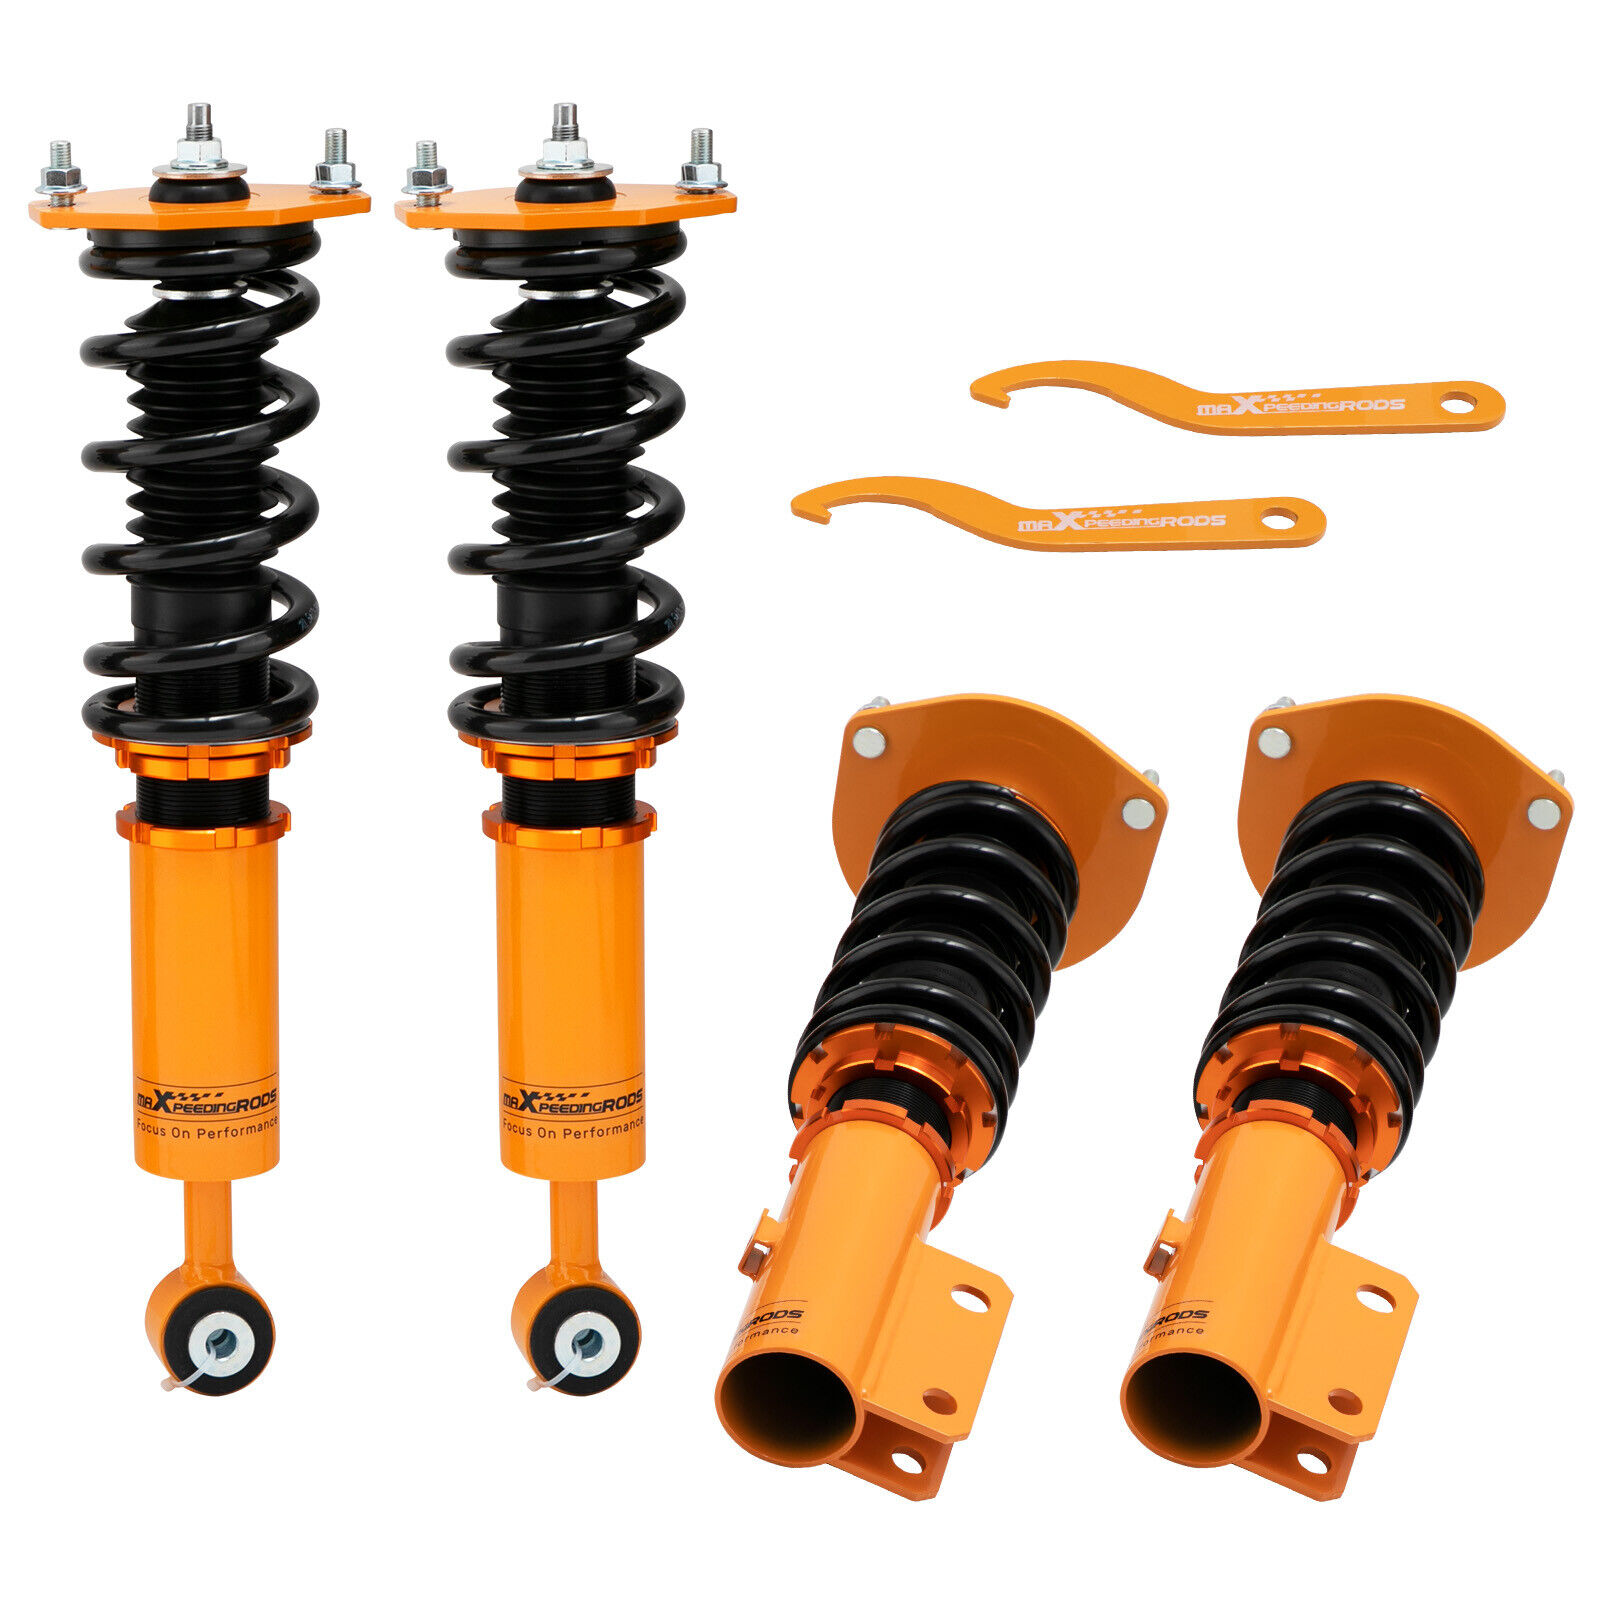 COILOVERS Struts Kit For MITSUBISHI 3000GT FWD 1991-1999